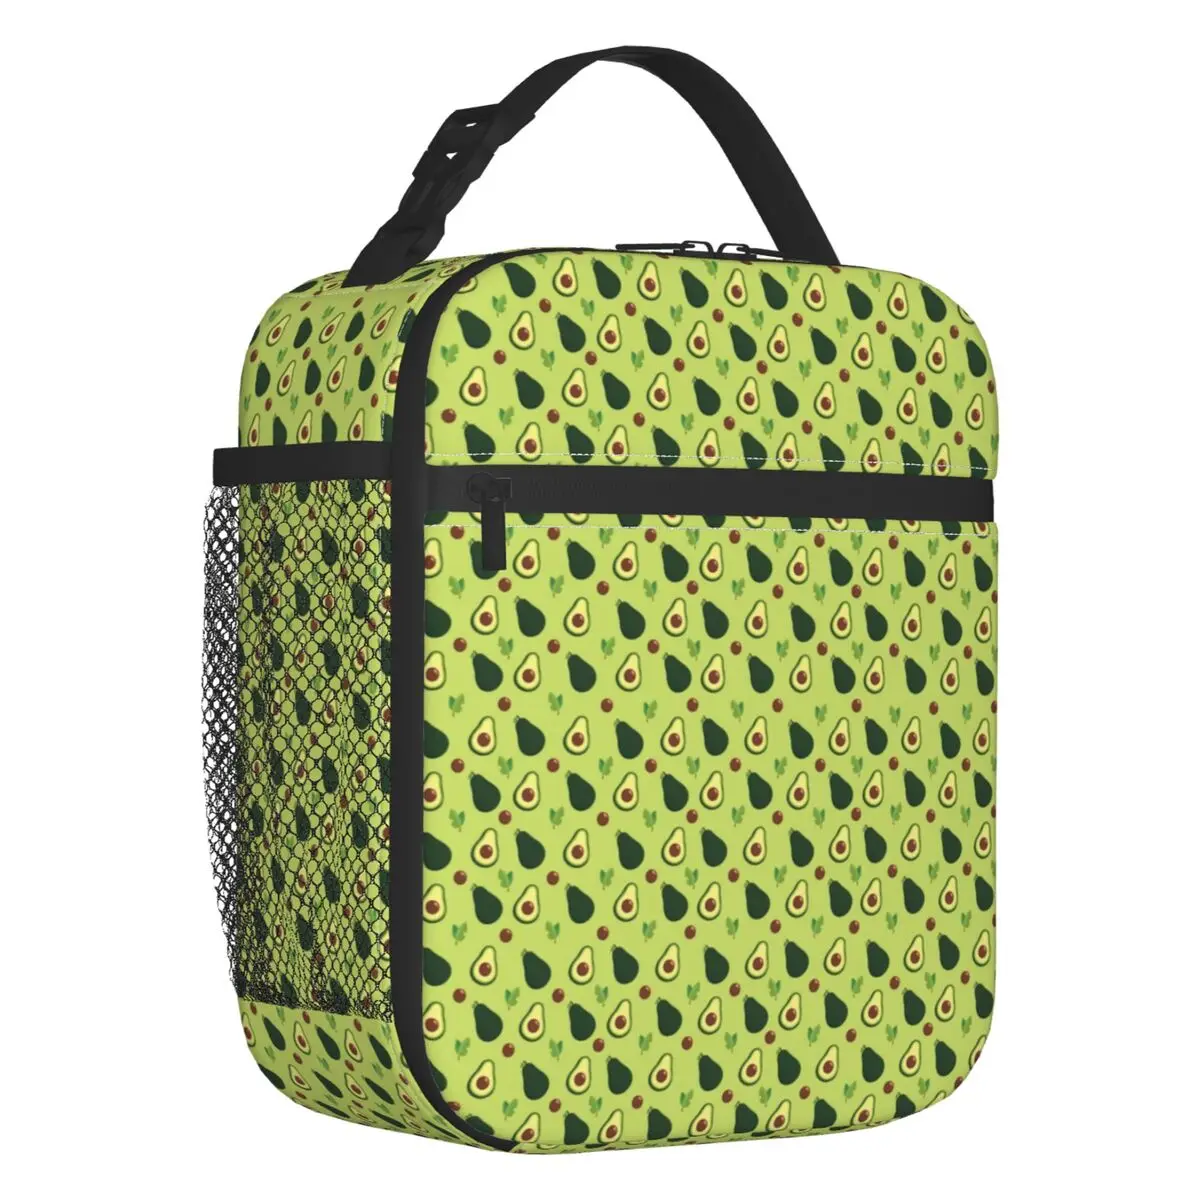 

Avocado Forest Pattern Insulated Lunch Bags for Women Portable Cooler Thermal Bento Box Outdoor Camping Travel